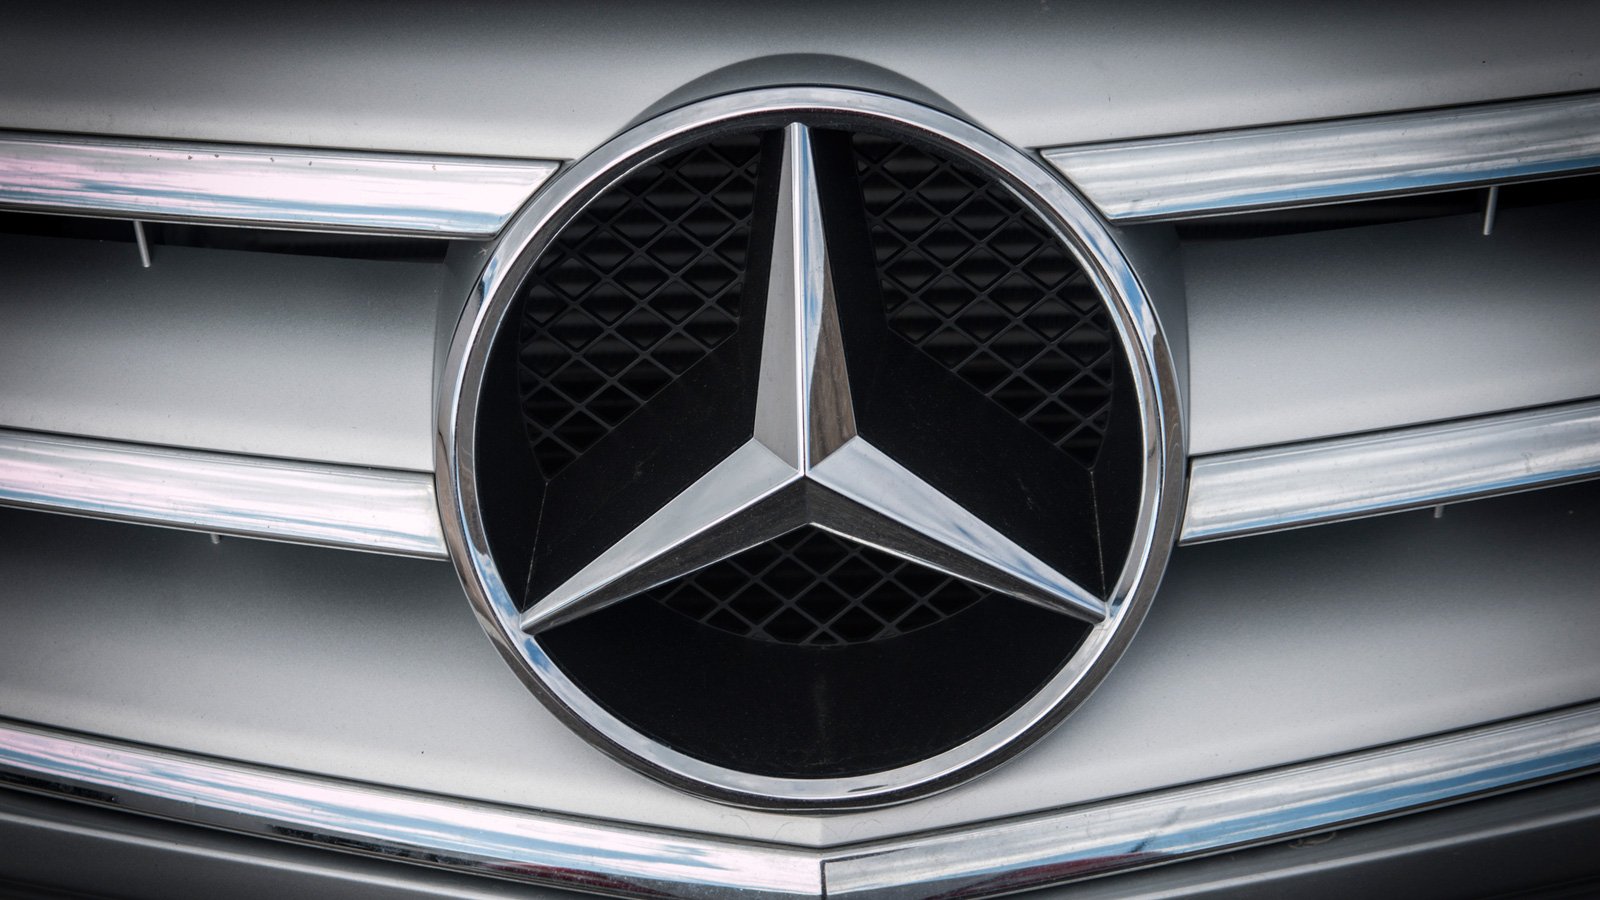 Toyota, Mercedes, BMW API flaws uncovered homeowners’ private data